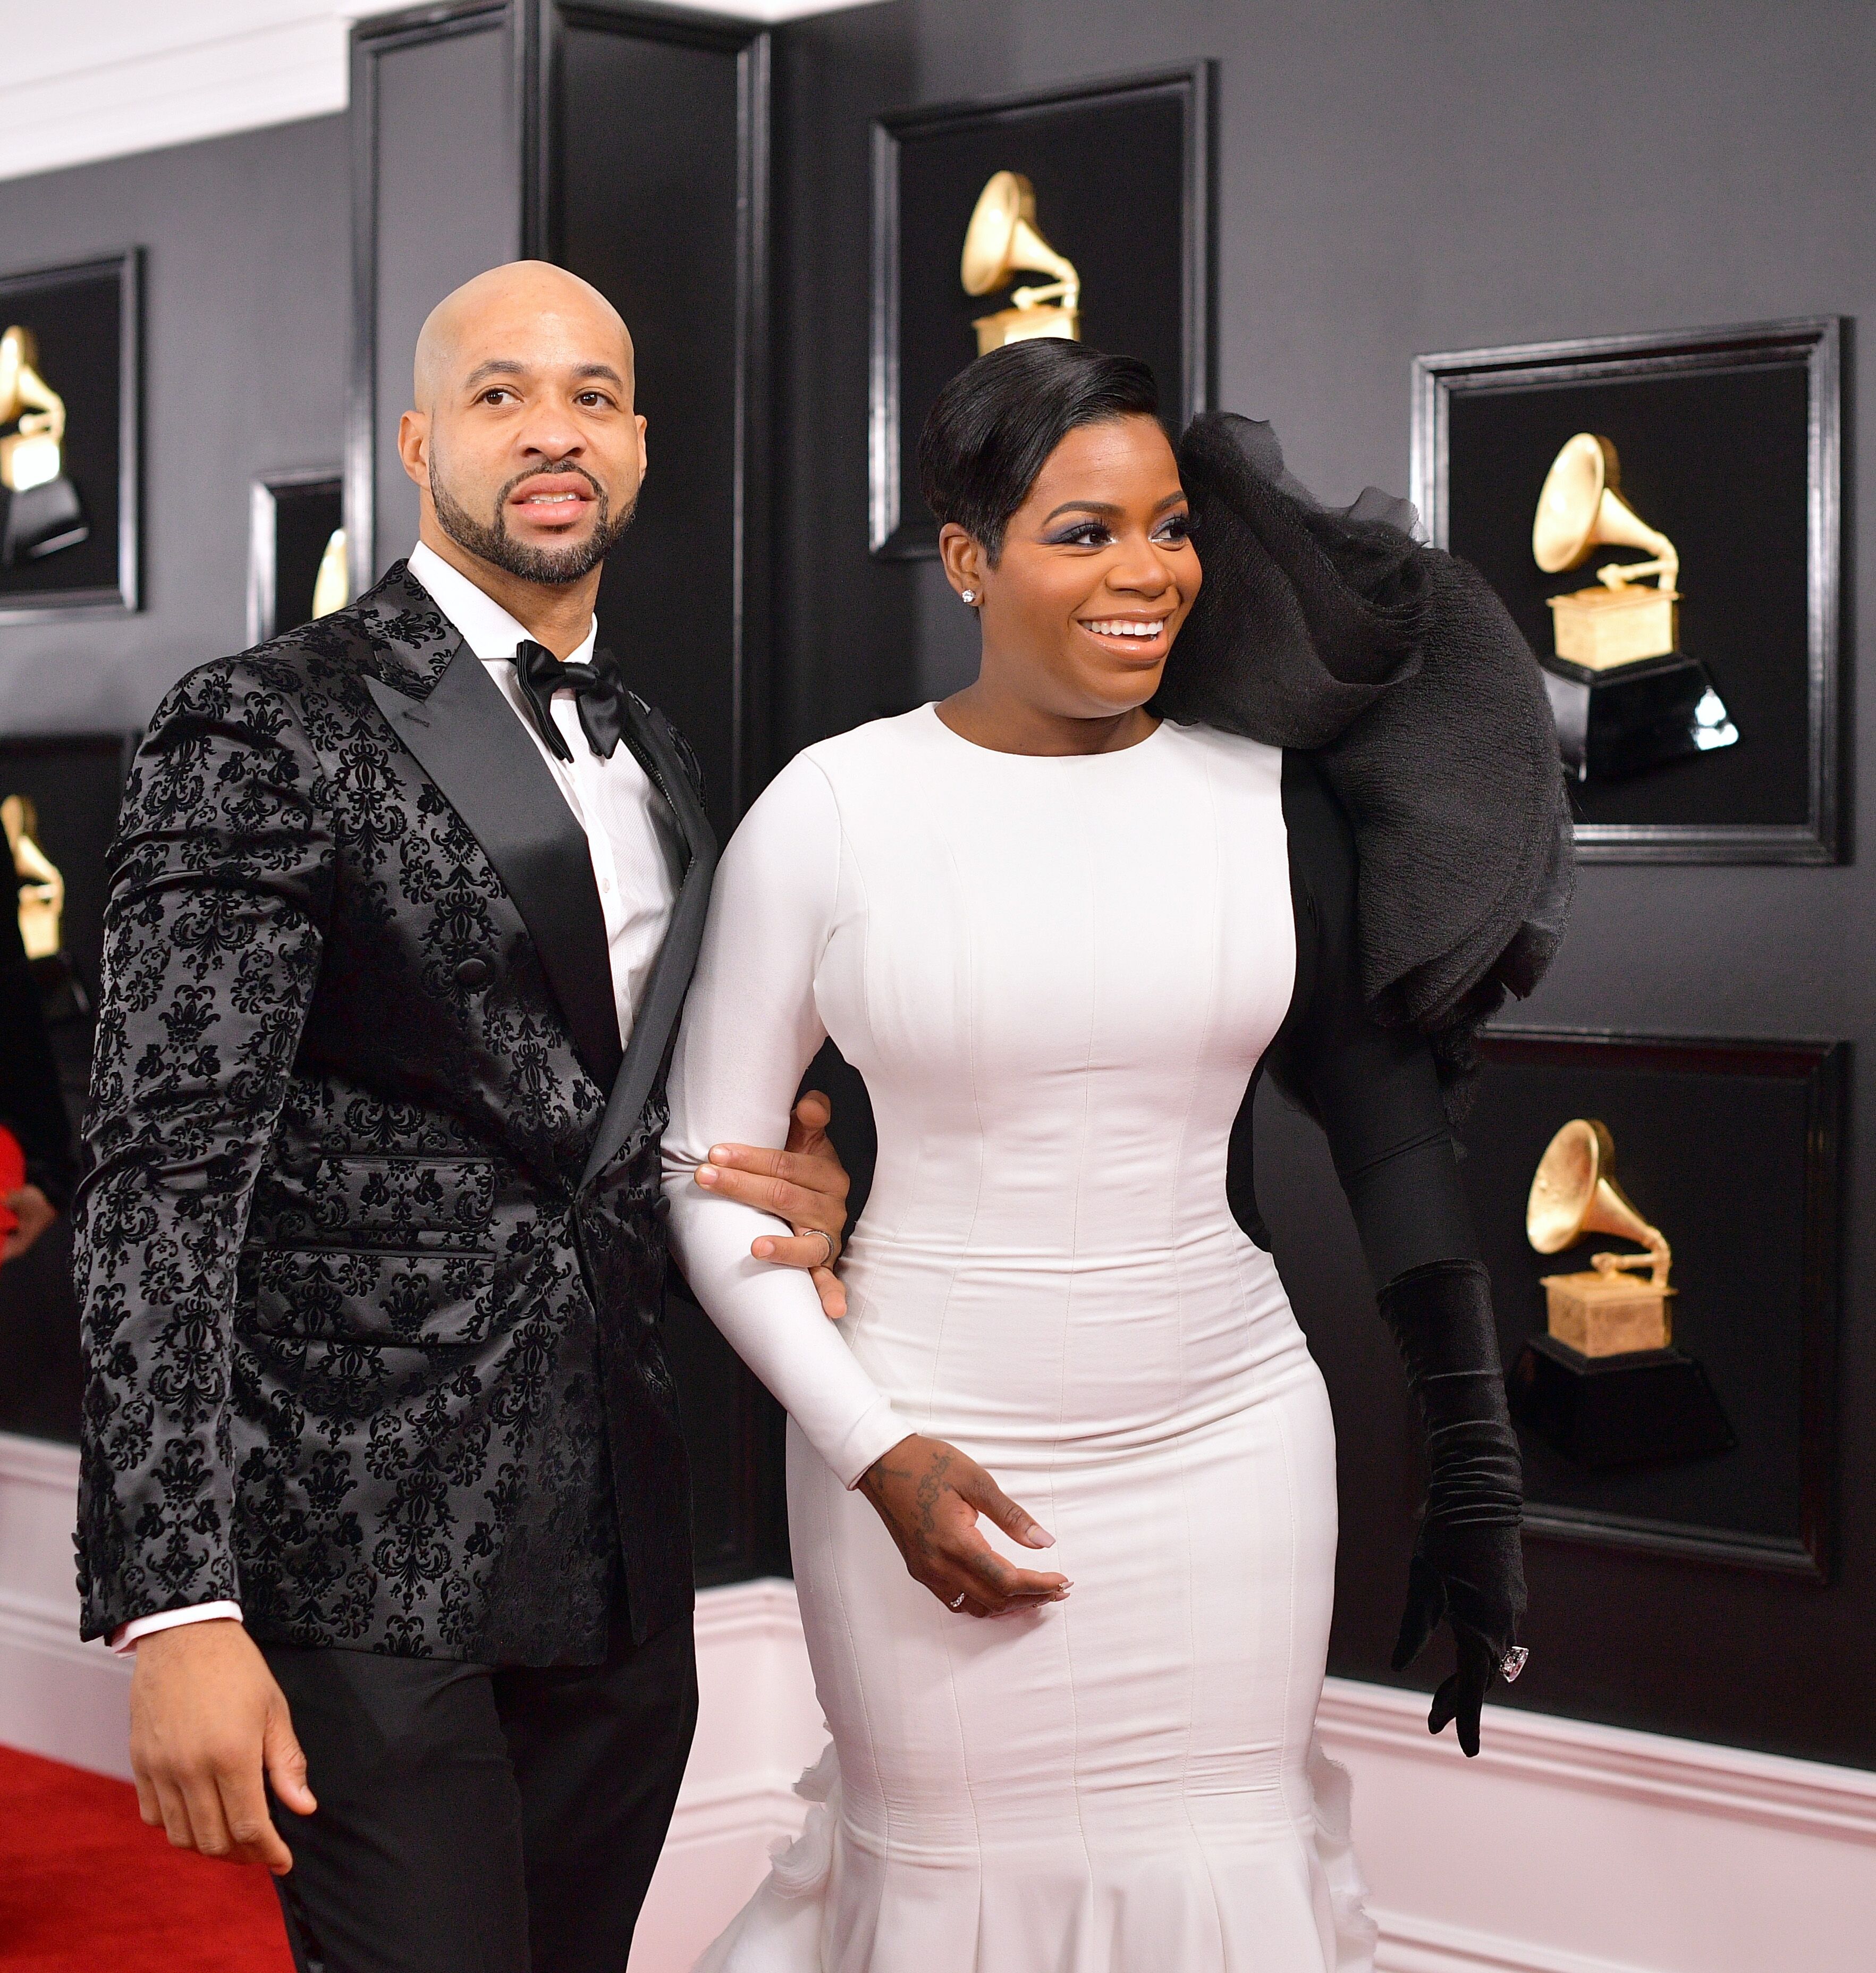 Fantasia Barrino with husband Kendall Taylor at the Grammys/ Source: Getty Images